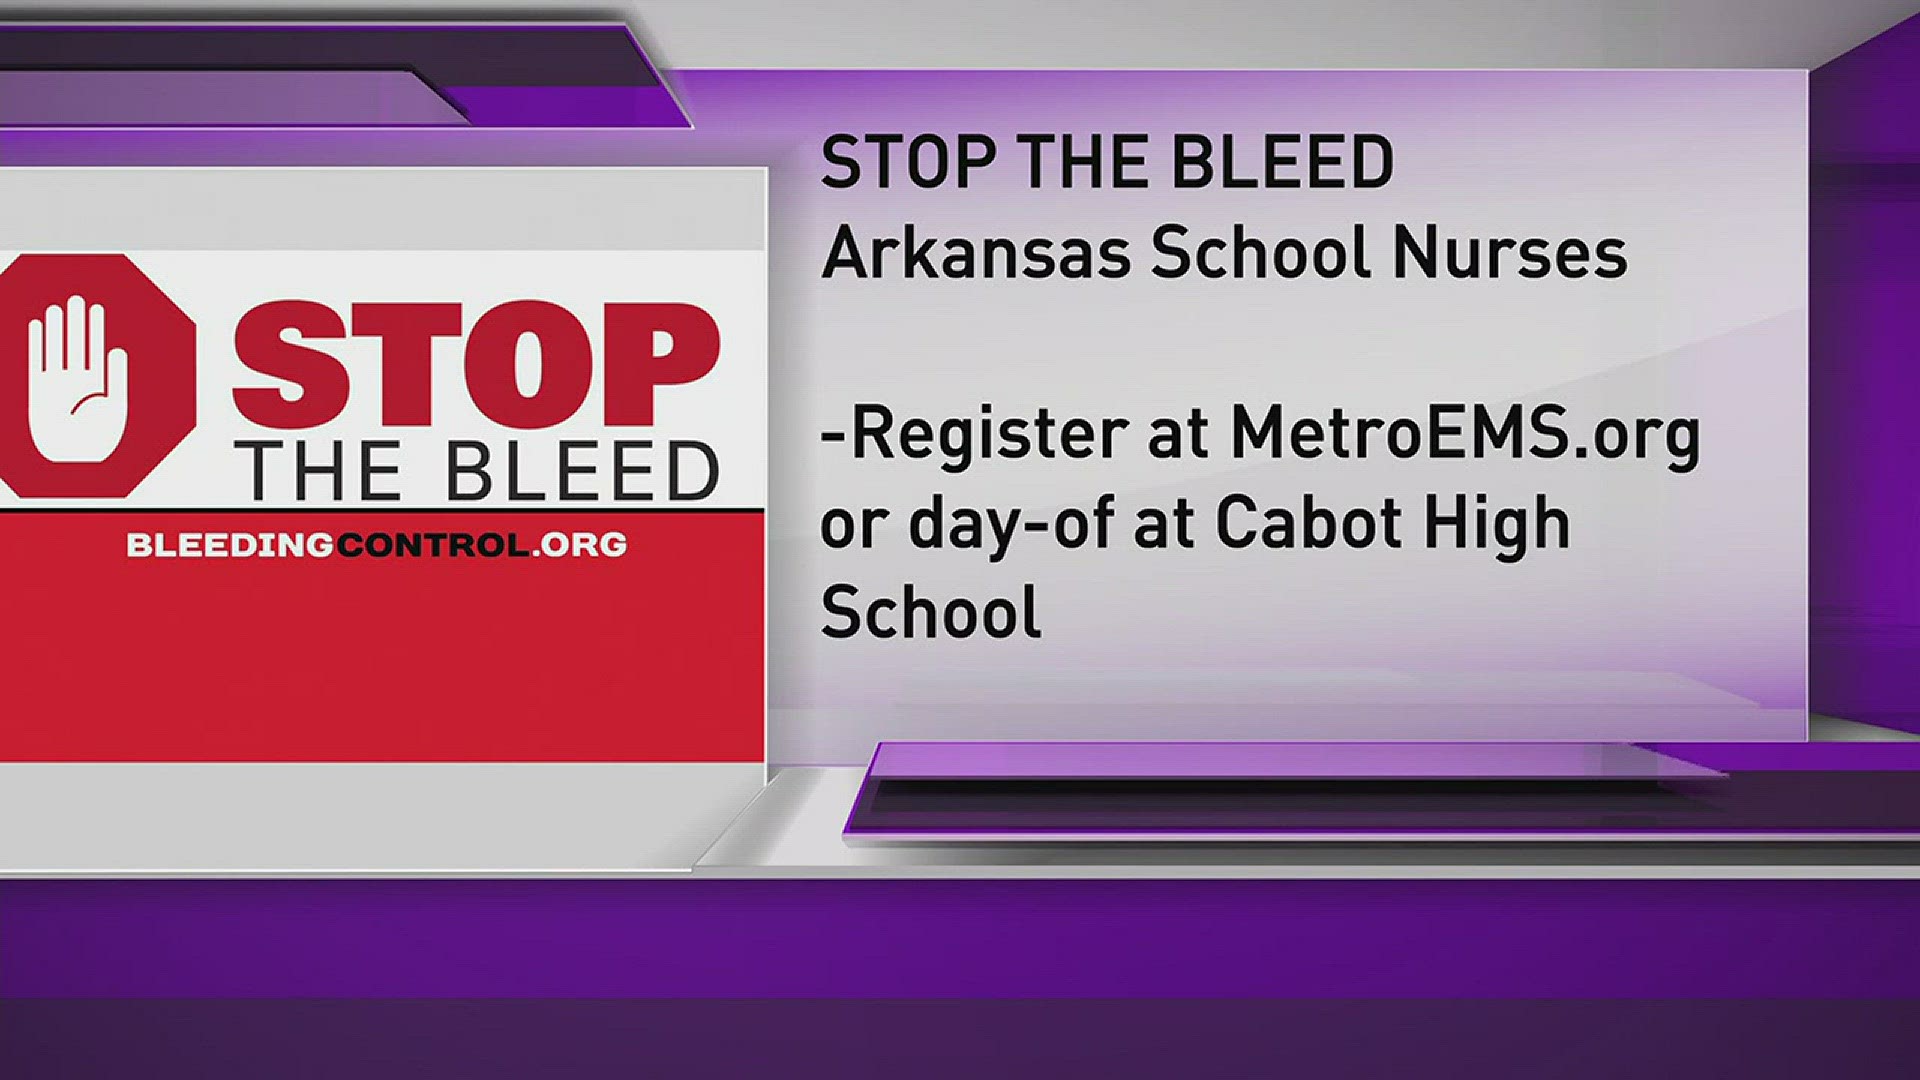 Dr. Marlon Doucet with MEMS and Charles Wooley, a registered nurse at Arkansas Children's Hospital joined THV11 This Morning to tell us about the 'Stop the Bleed' training